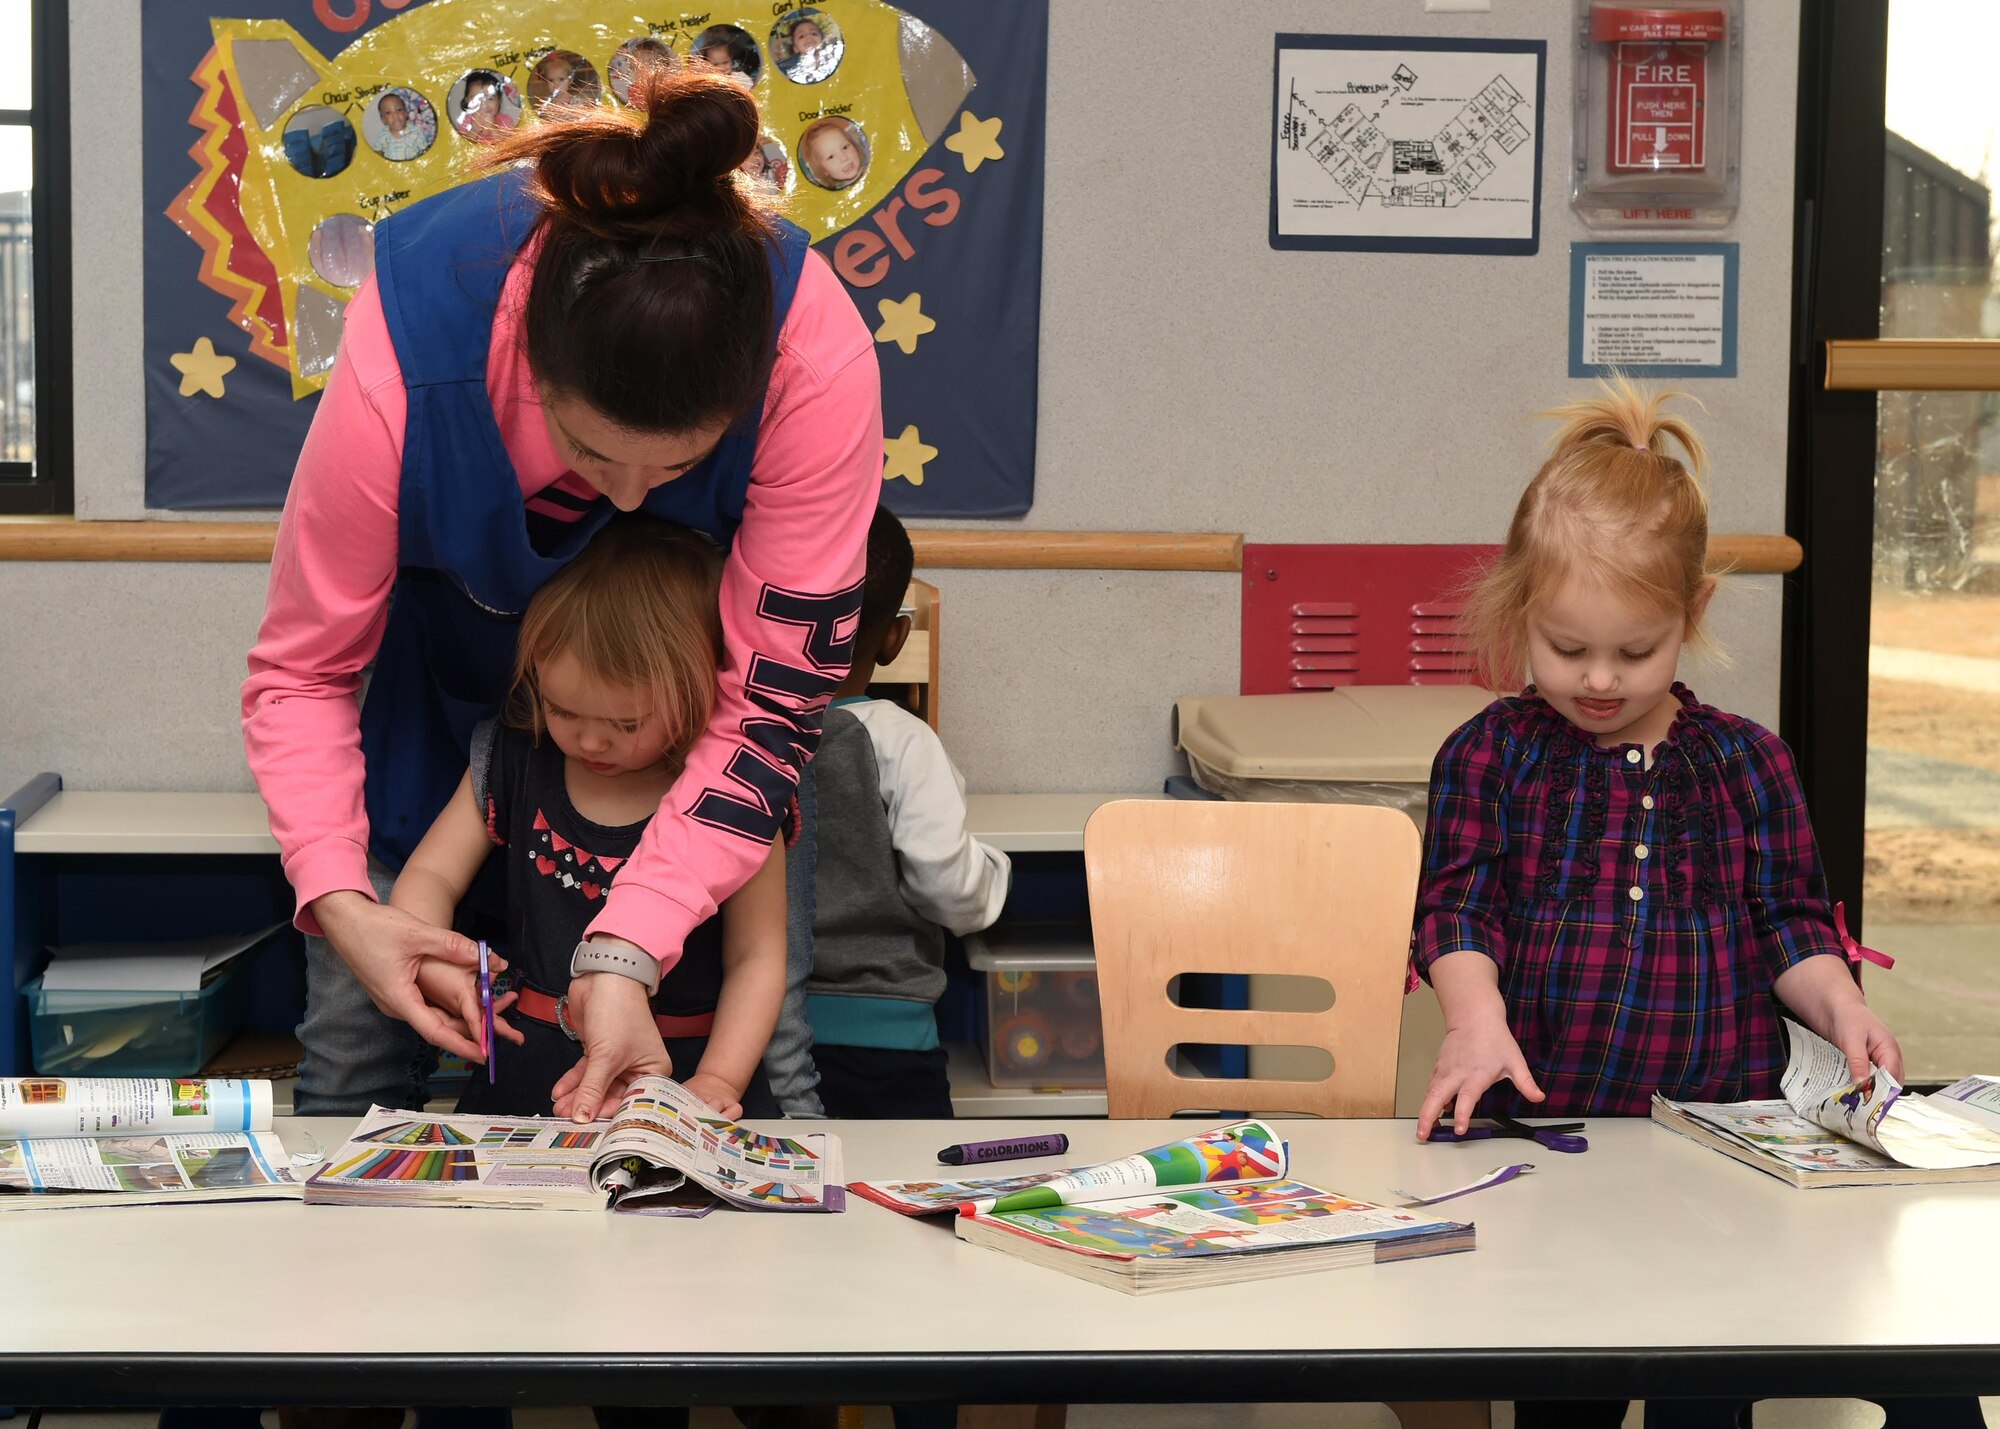 Michel Miklja, 97th Force support Squadron, Child Development Program Leader assists children with an arts and crafts project, January 4, 2017. The CDC provides a safe and healthy learning environment so that Department of Defense civilian and military personnel can focus on the mission knowing their children are well taken care of during the duty day.